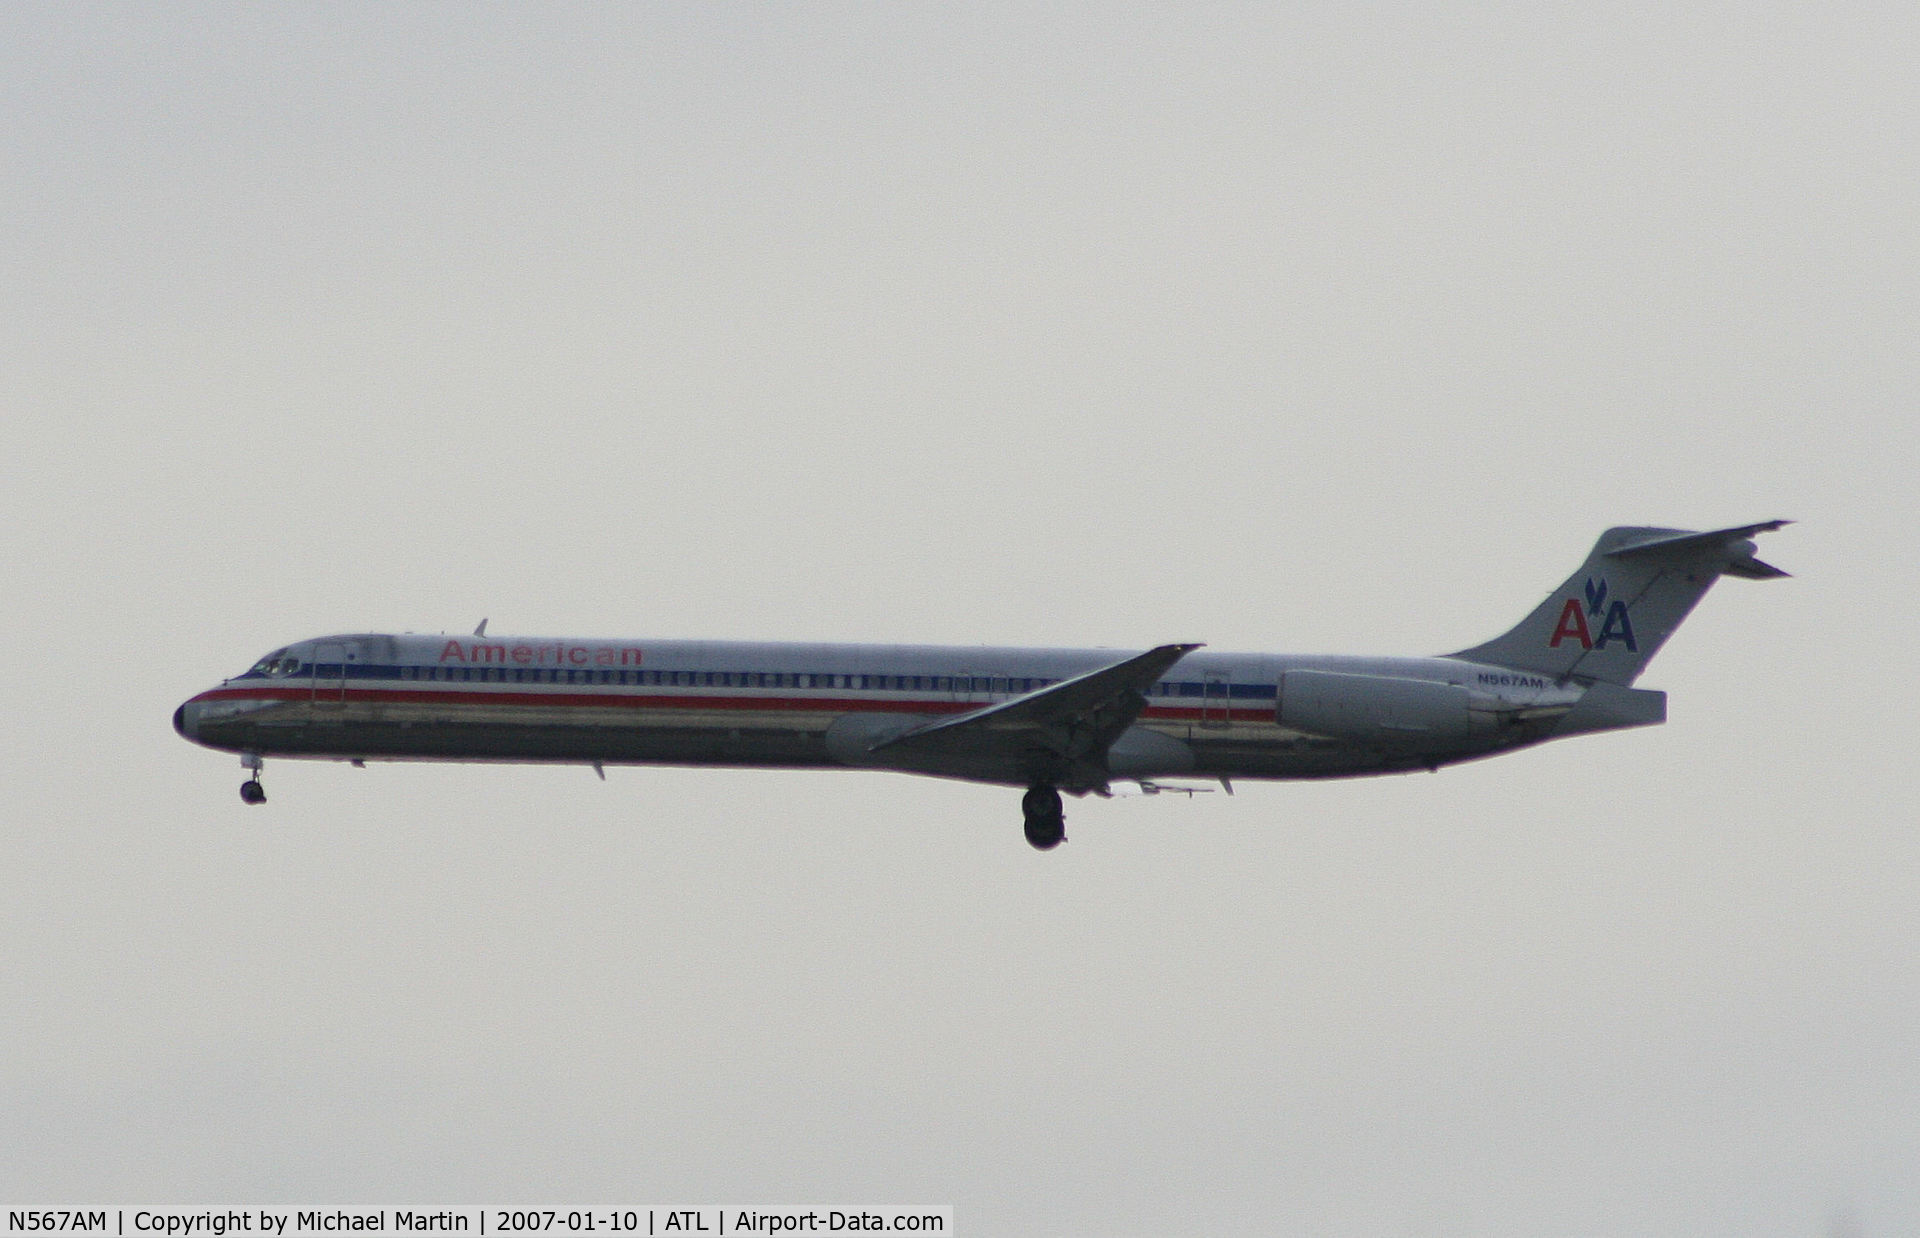 N567AM, 1992 McDonnell Douglas MD-83 (DC-9-83) C/N 53293, On final for Runway 10